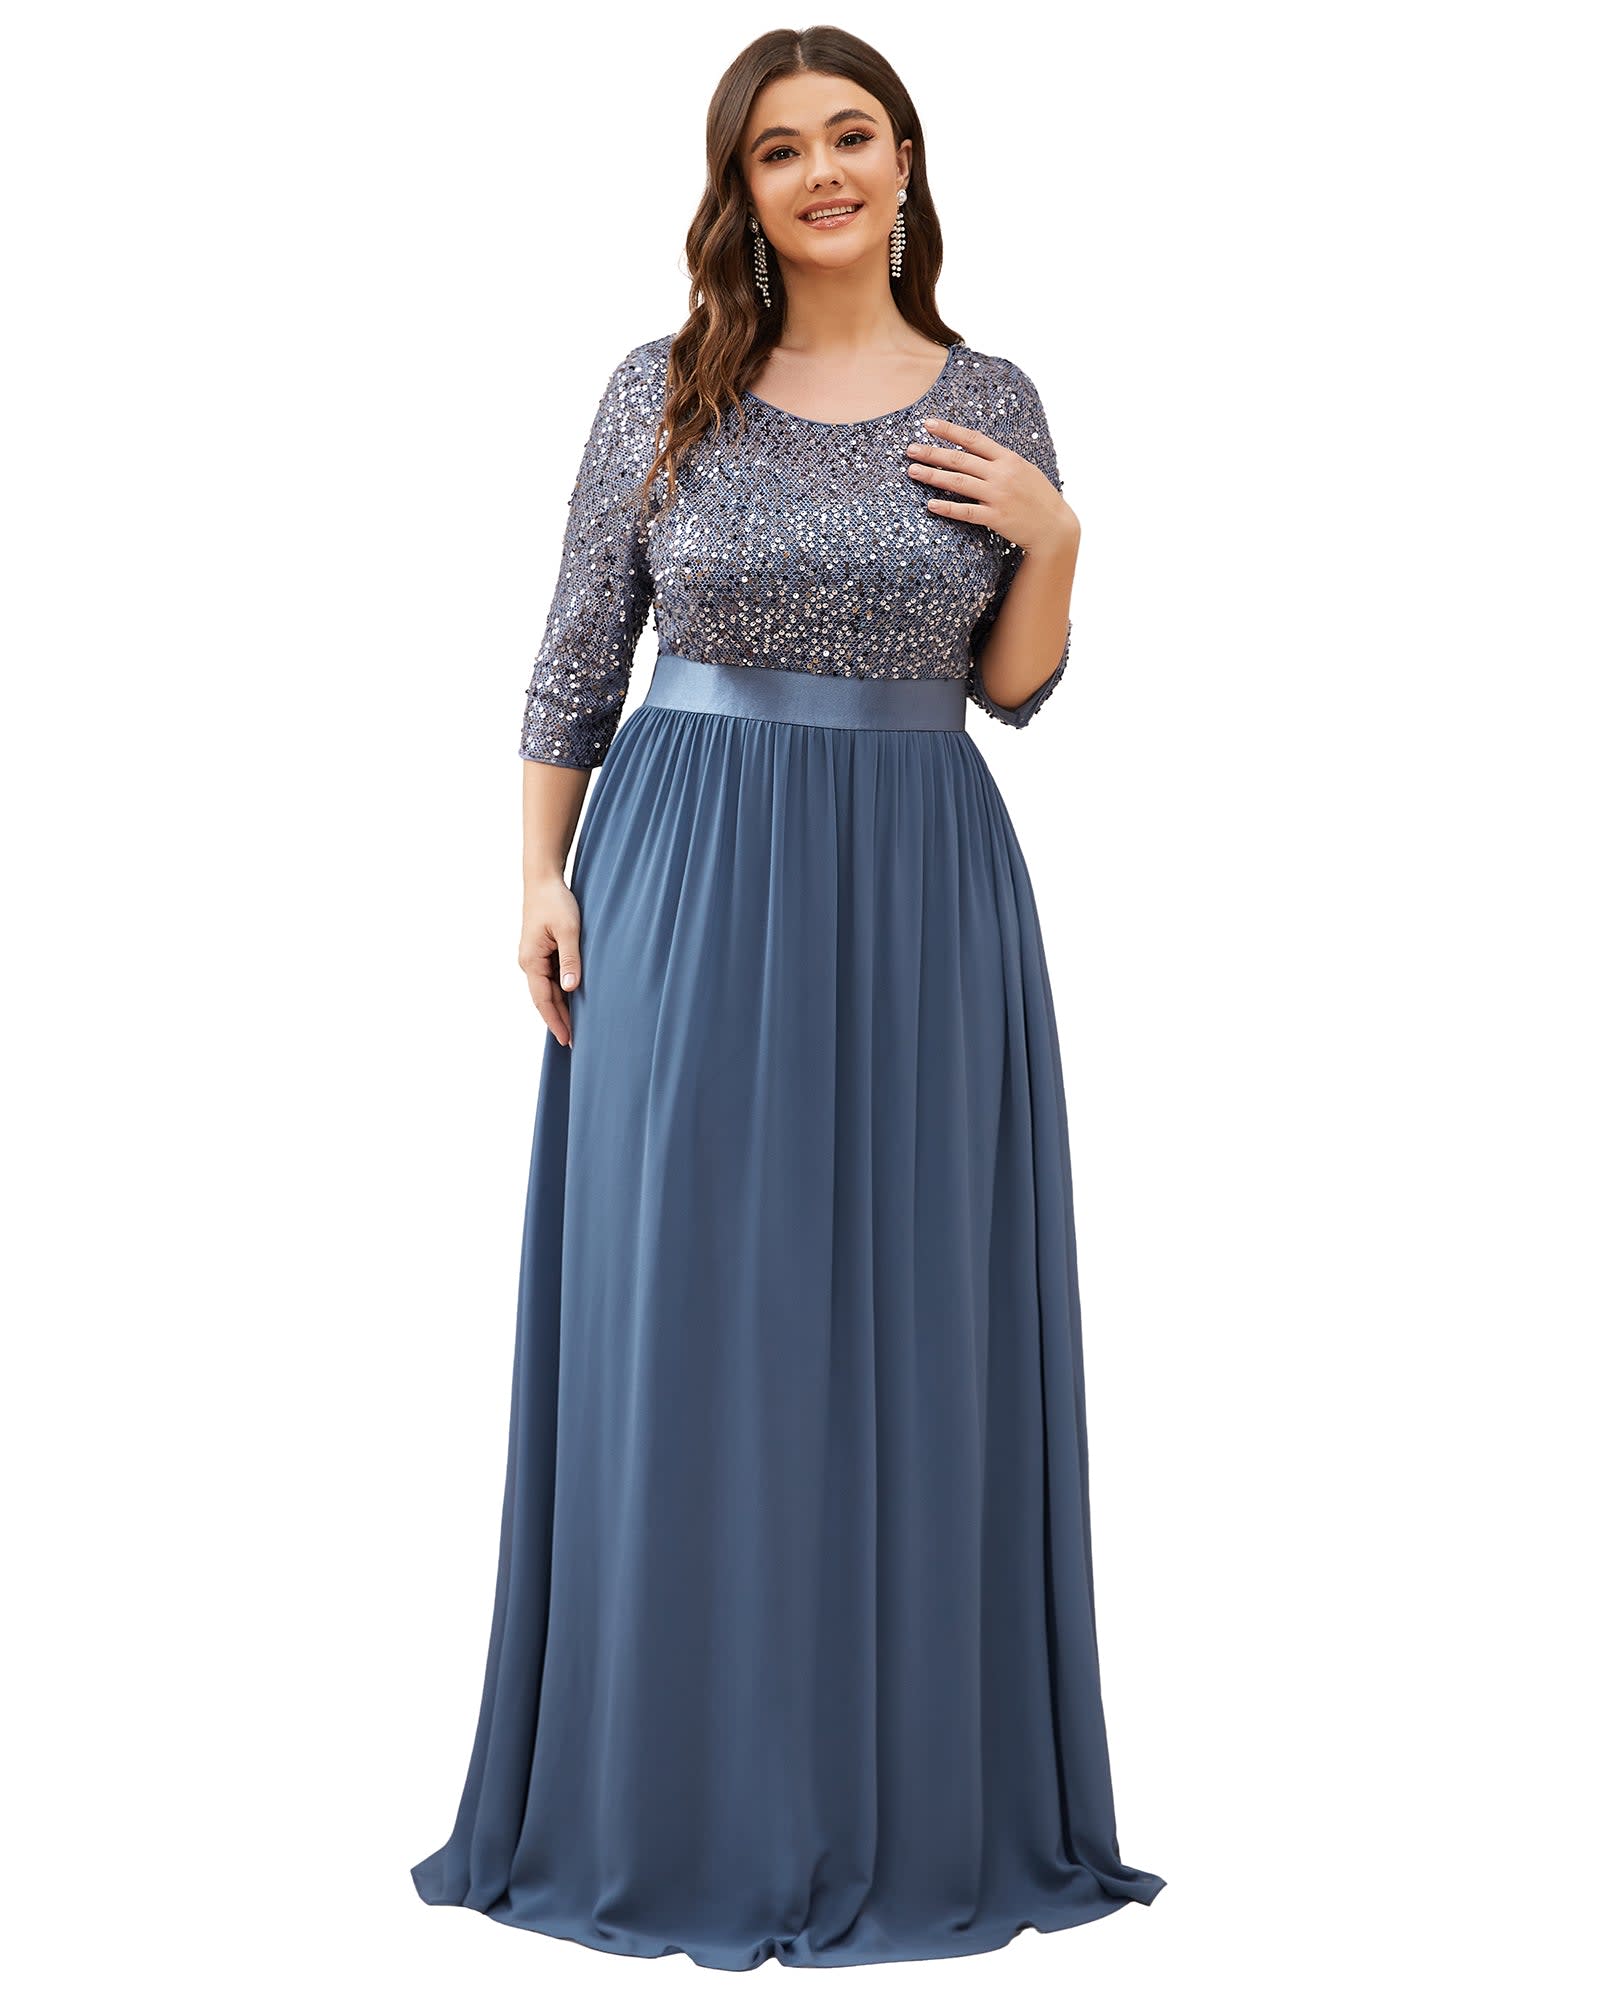 3/4 Sleeves Round Neck Evening Dress With Sequin Bodice | Dusty Navy